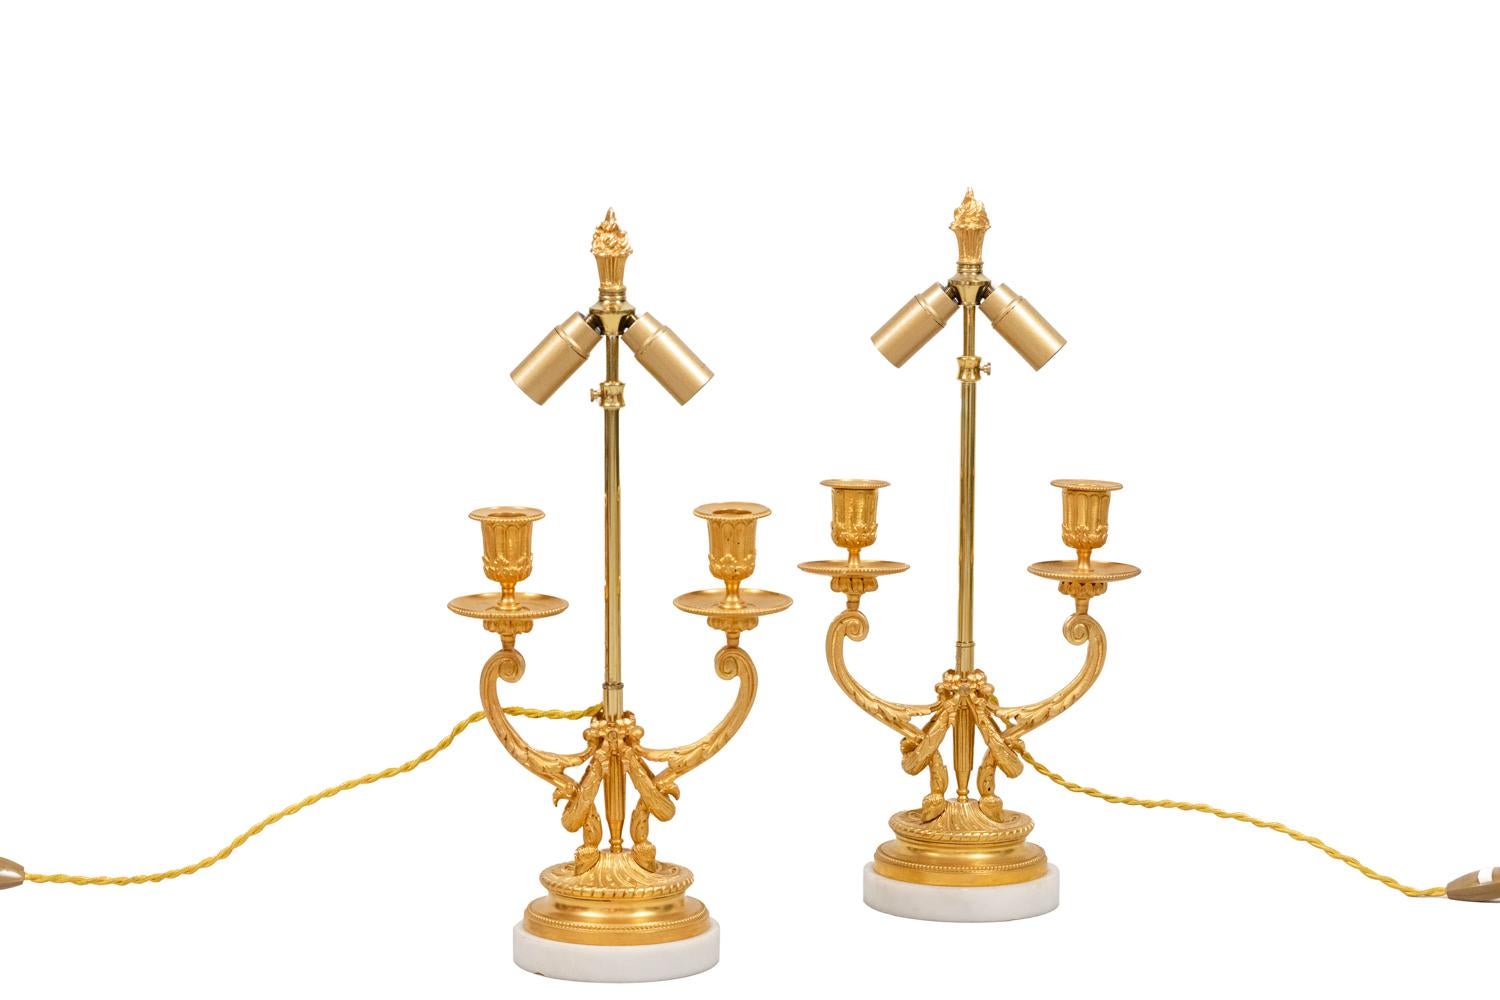 Pair of Louis XVI style lamps in gilt bronze. Two-arm lights in volute shape finished by hoofs and adorned with acanthus leaves. Bobeches decorated with flutes and leaves and cups adorned with a beads frieze. Shaft topped by a torch and decorated